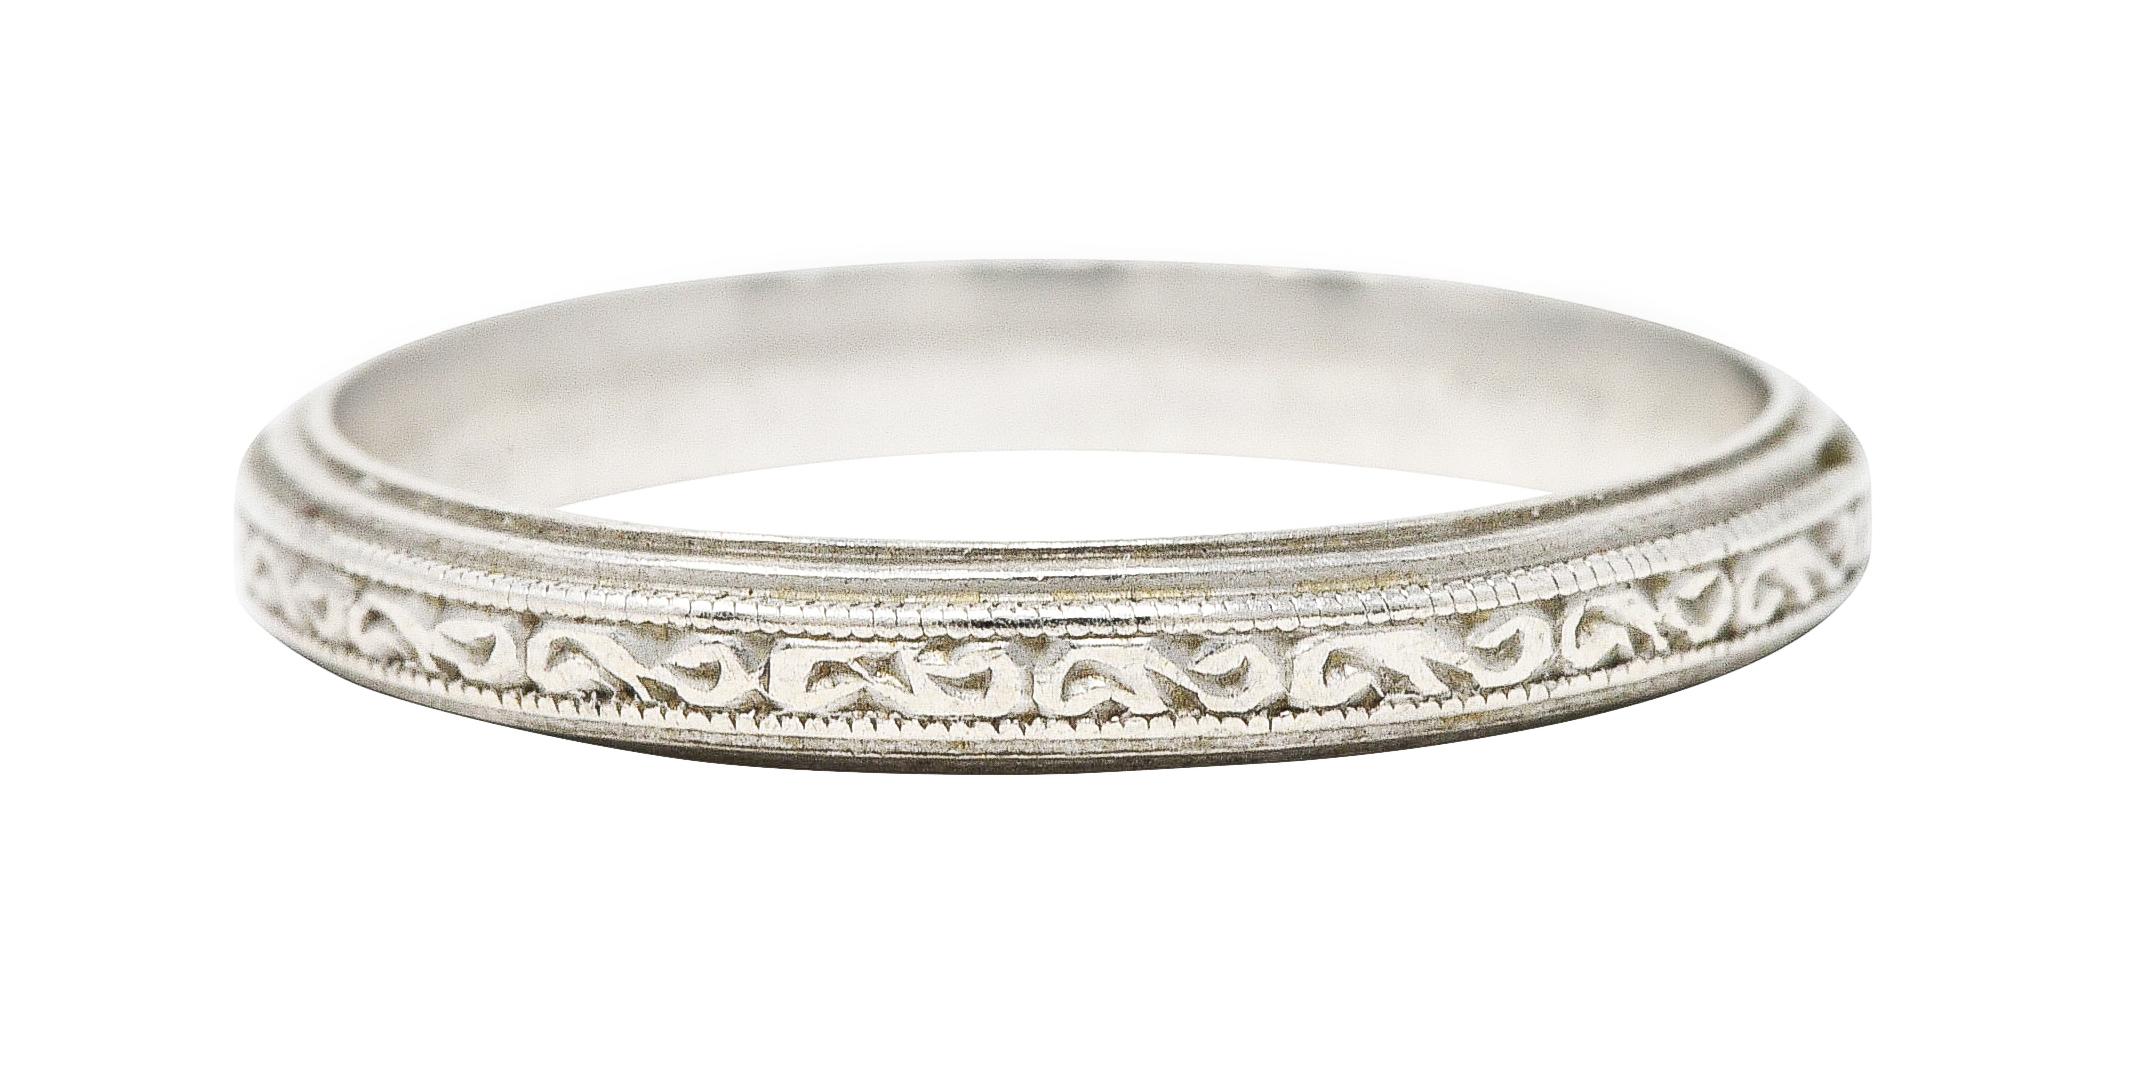 Band ring features engraved scroll motif fully around. With grooved edges. Stamped for platinum. Circa: 1930's. Ring size: 6 1/4 and not sizable. Measures: North to South 2.5 mm and sits 1.5 mm high. Total weight: 3.1 grams. Swirling. Intricate.